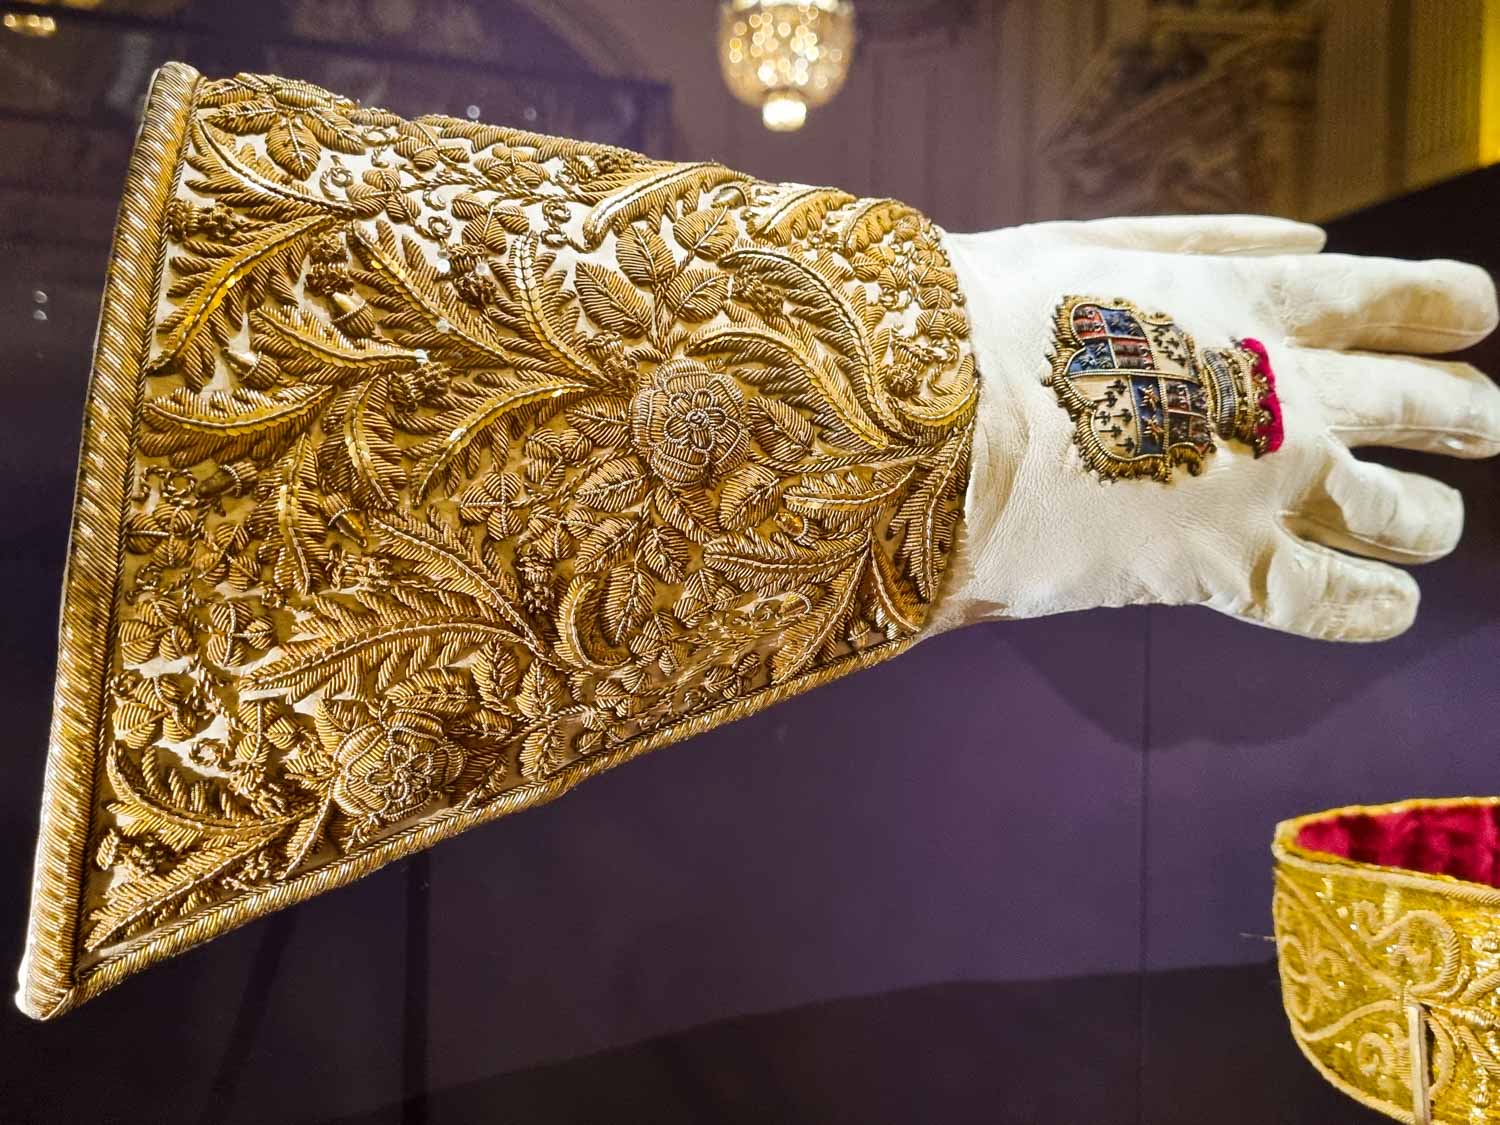 Richly embroidered gold and white Coronation glove on display in a special exhibition as part of the summer opening of the state rooms at Buckingham Palace - my tips for visiting Buckingham Palace in 2023